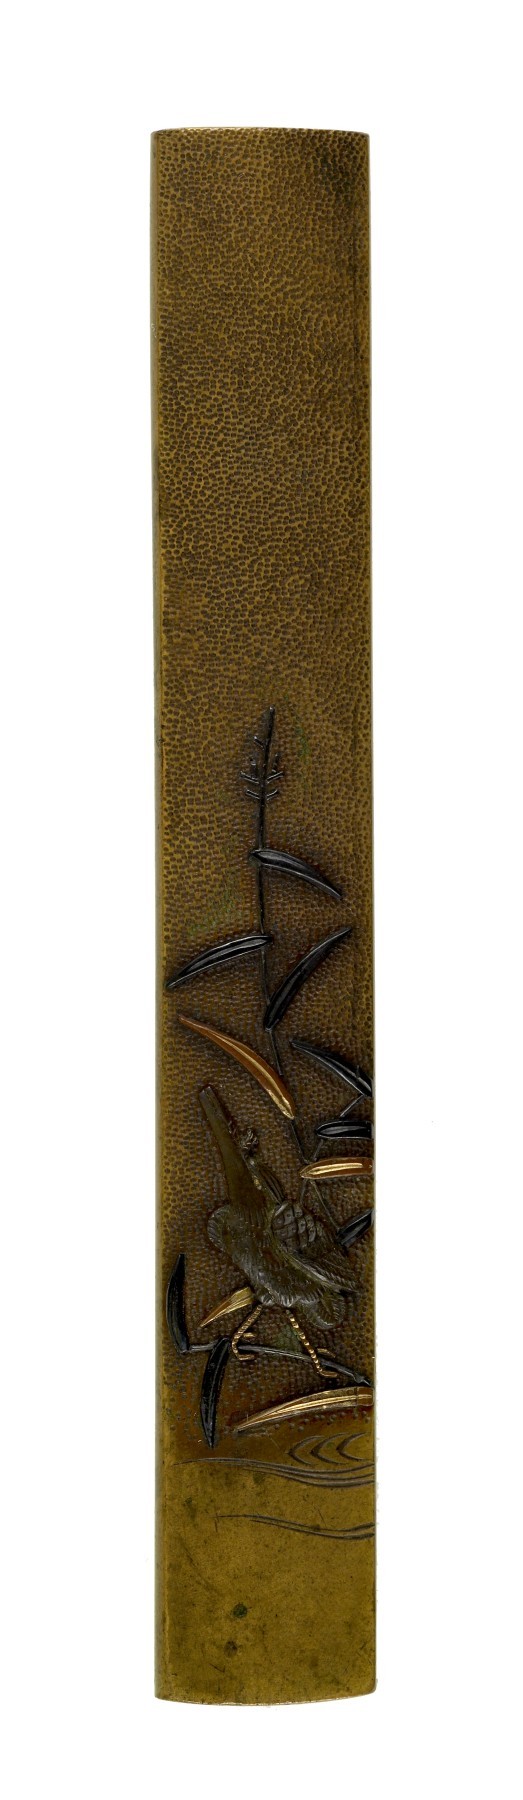 Kozuka with a Kingfisher in Reeds